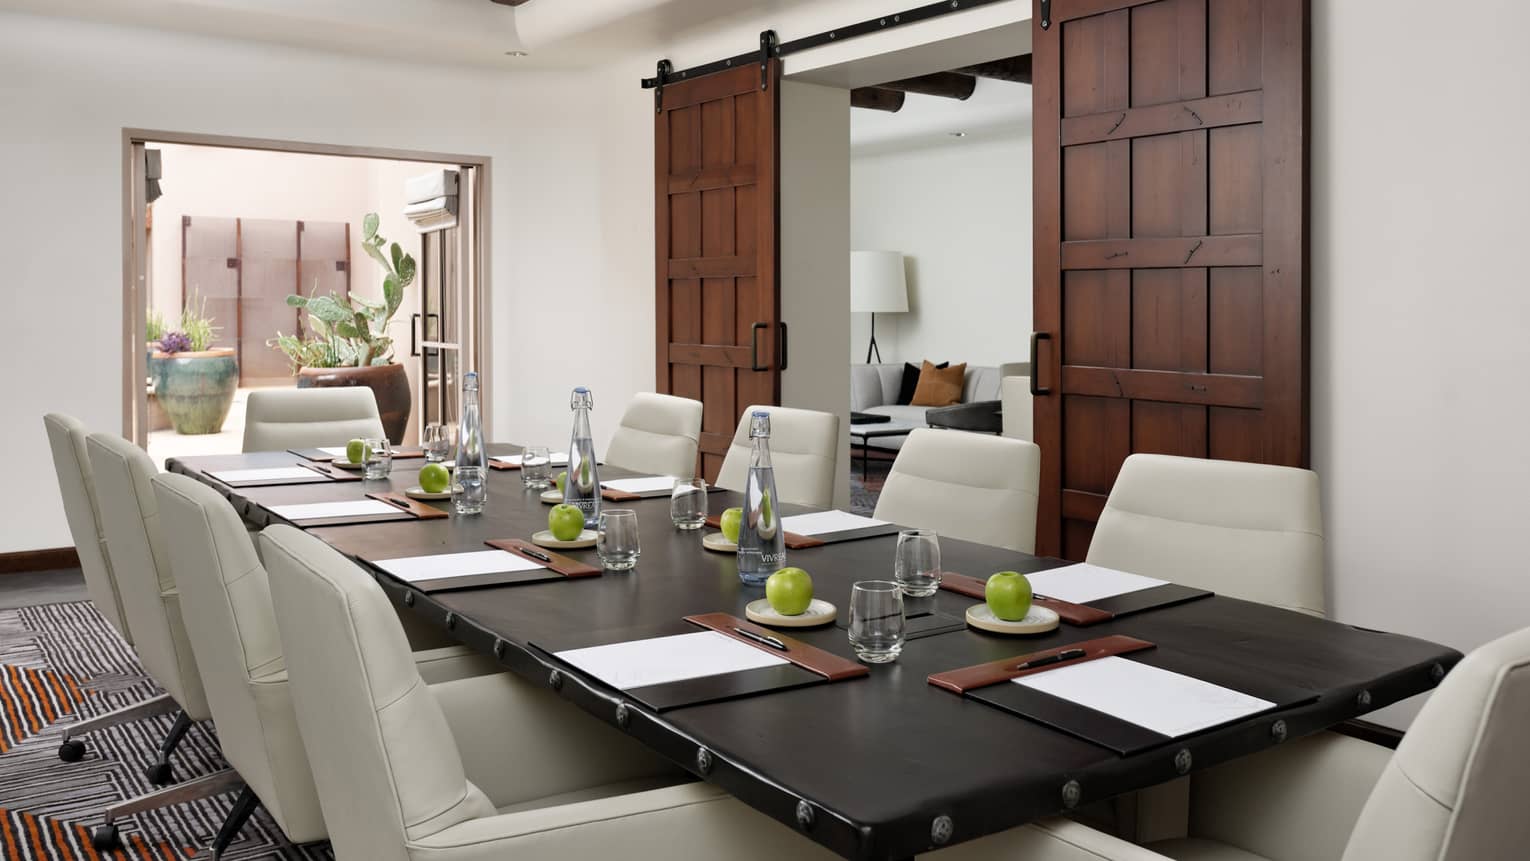 A meeting rom with leather chairs around a large rectangular table, two large wooden sliding door are on a wall.